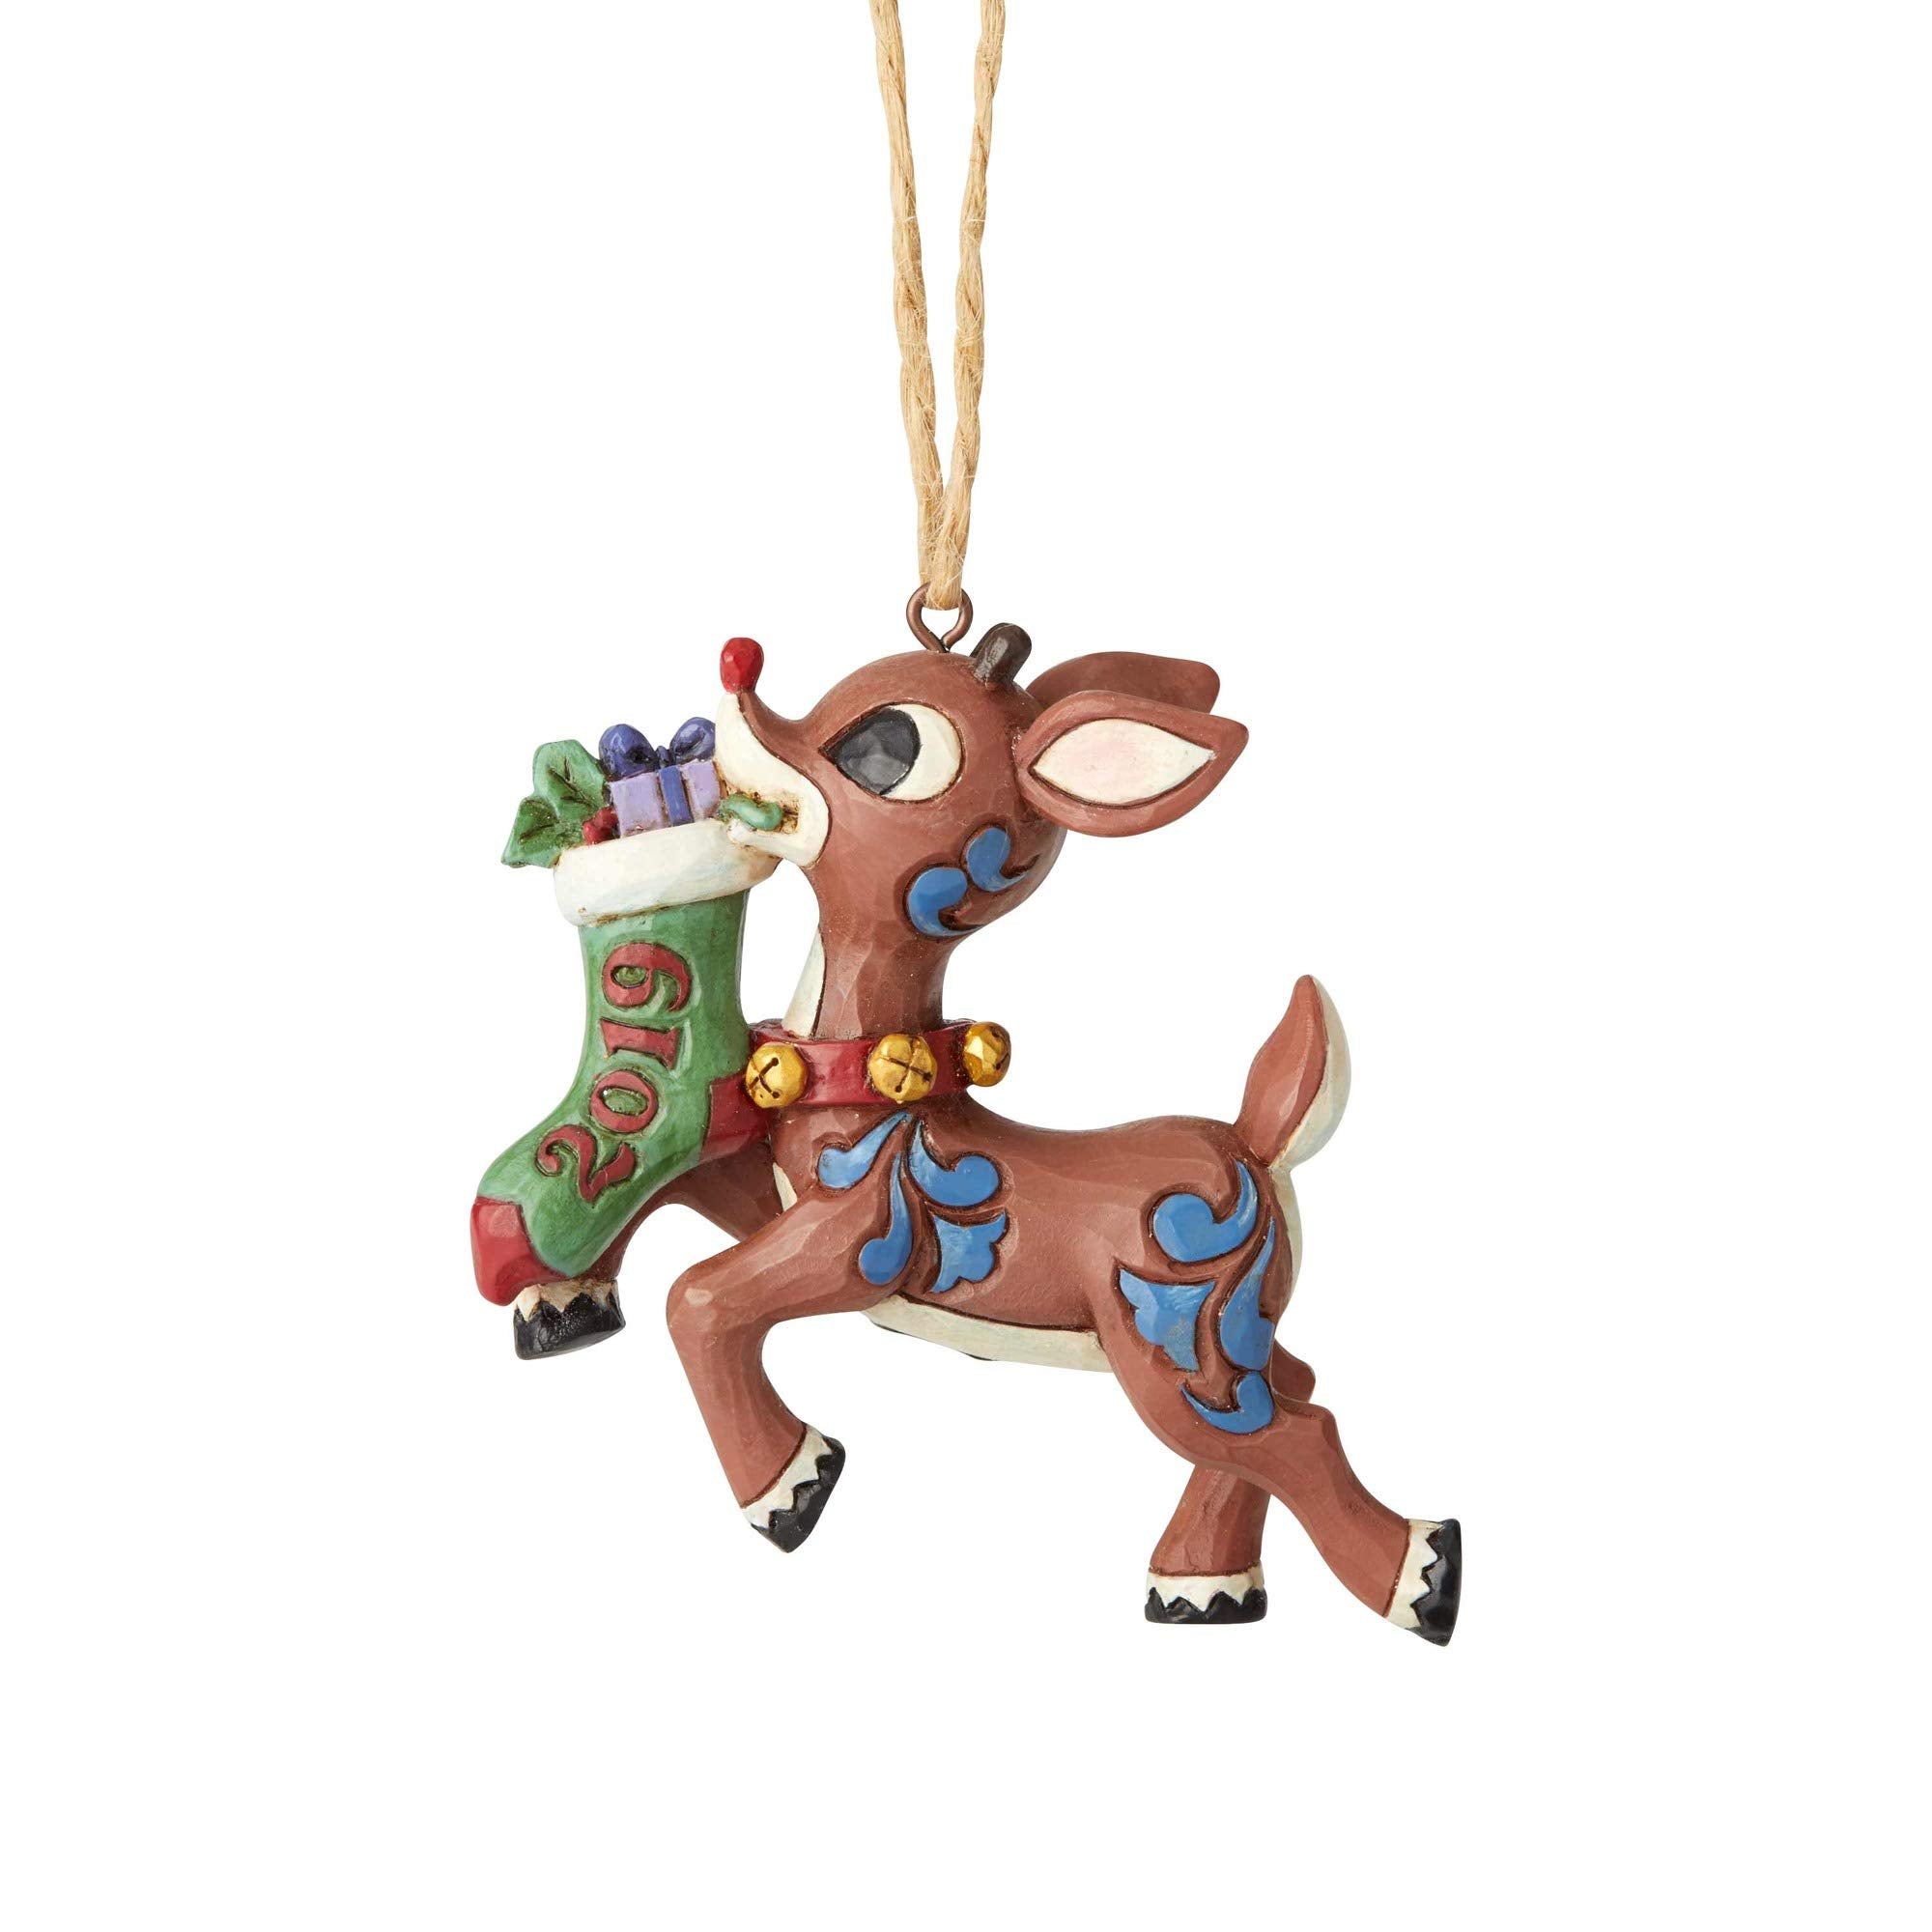 Enesco Rudolph Traditions by Jim Shore 2019 Stocking Hanging Ornament, 3.3 Inch, Multicolor